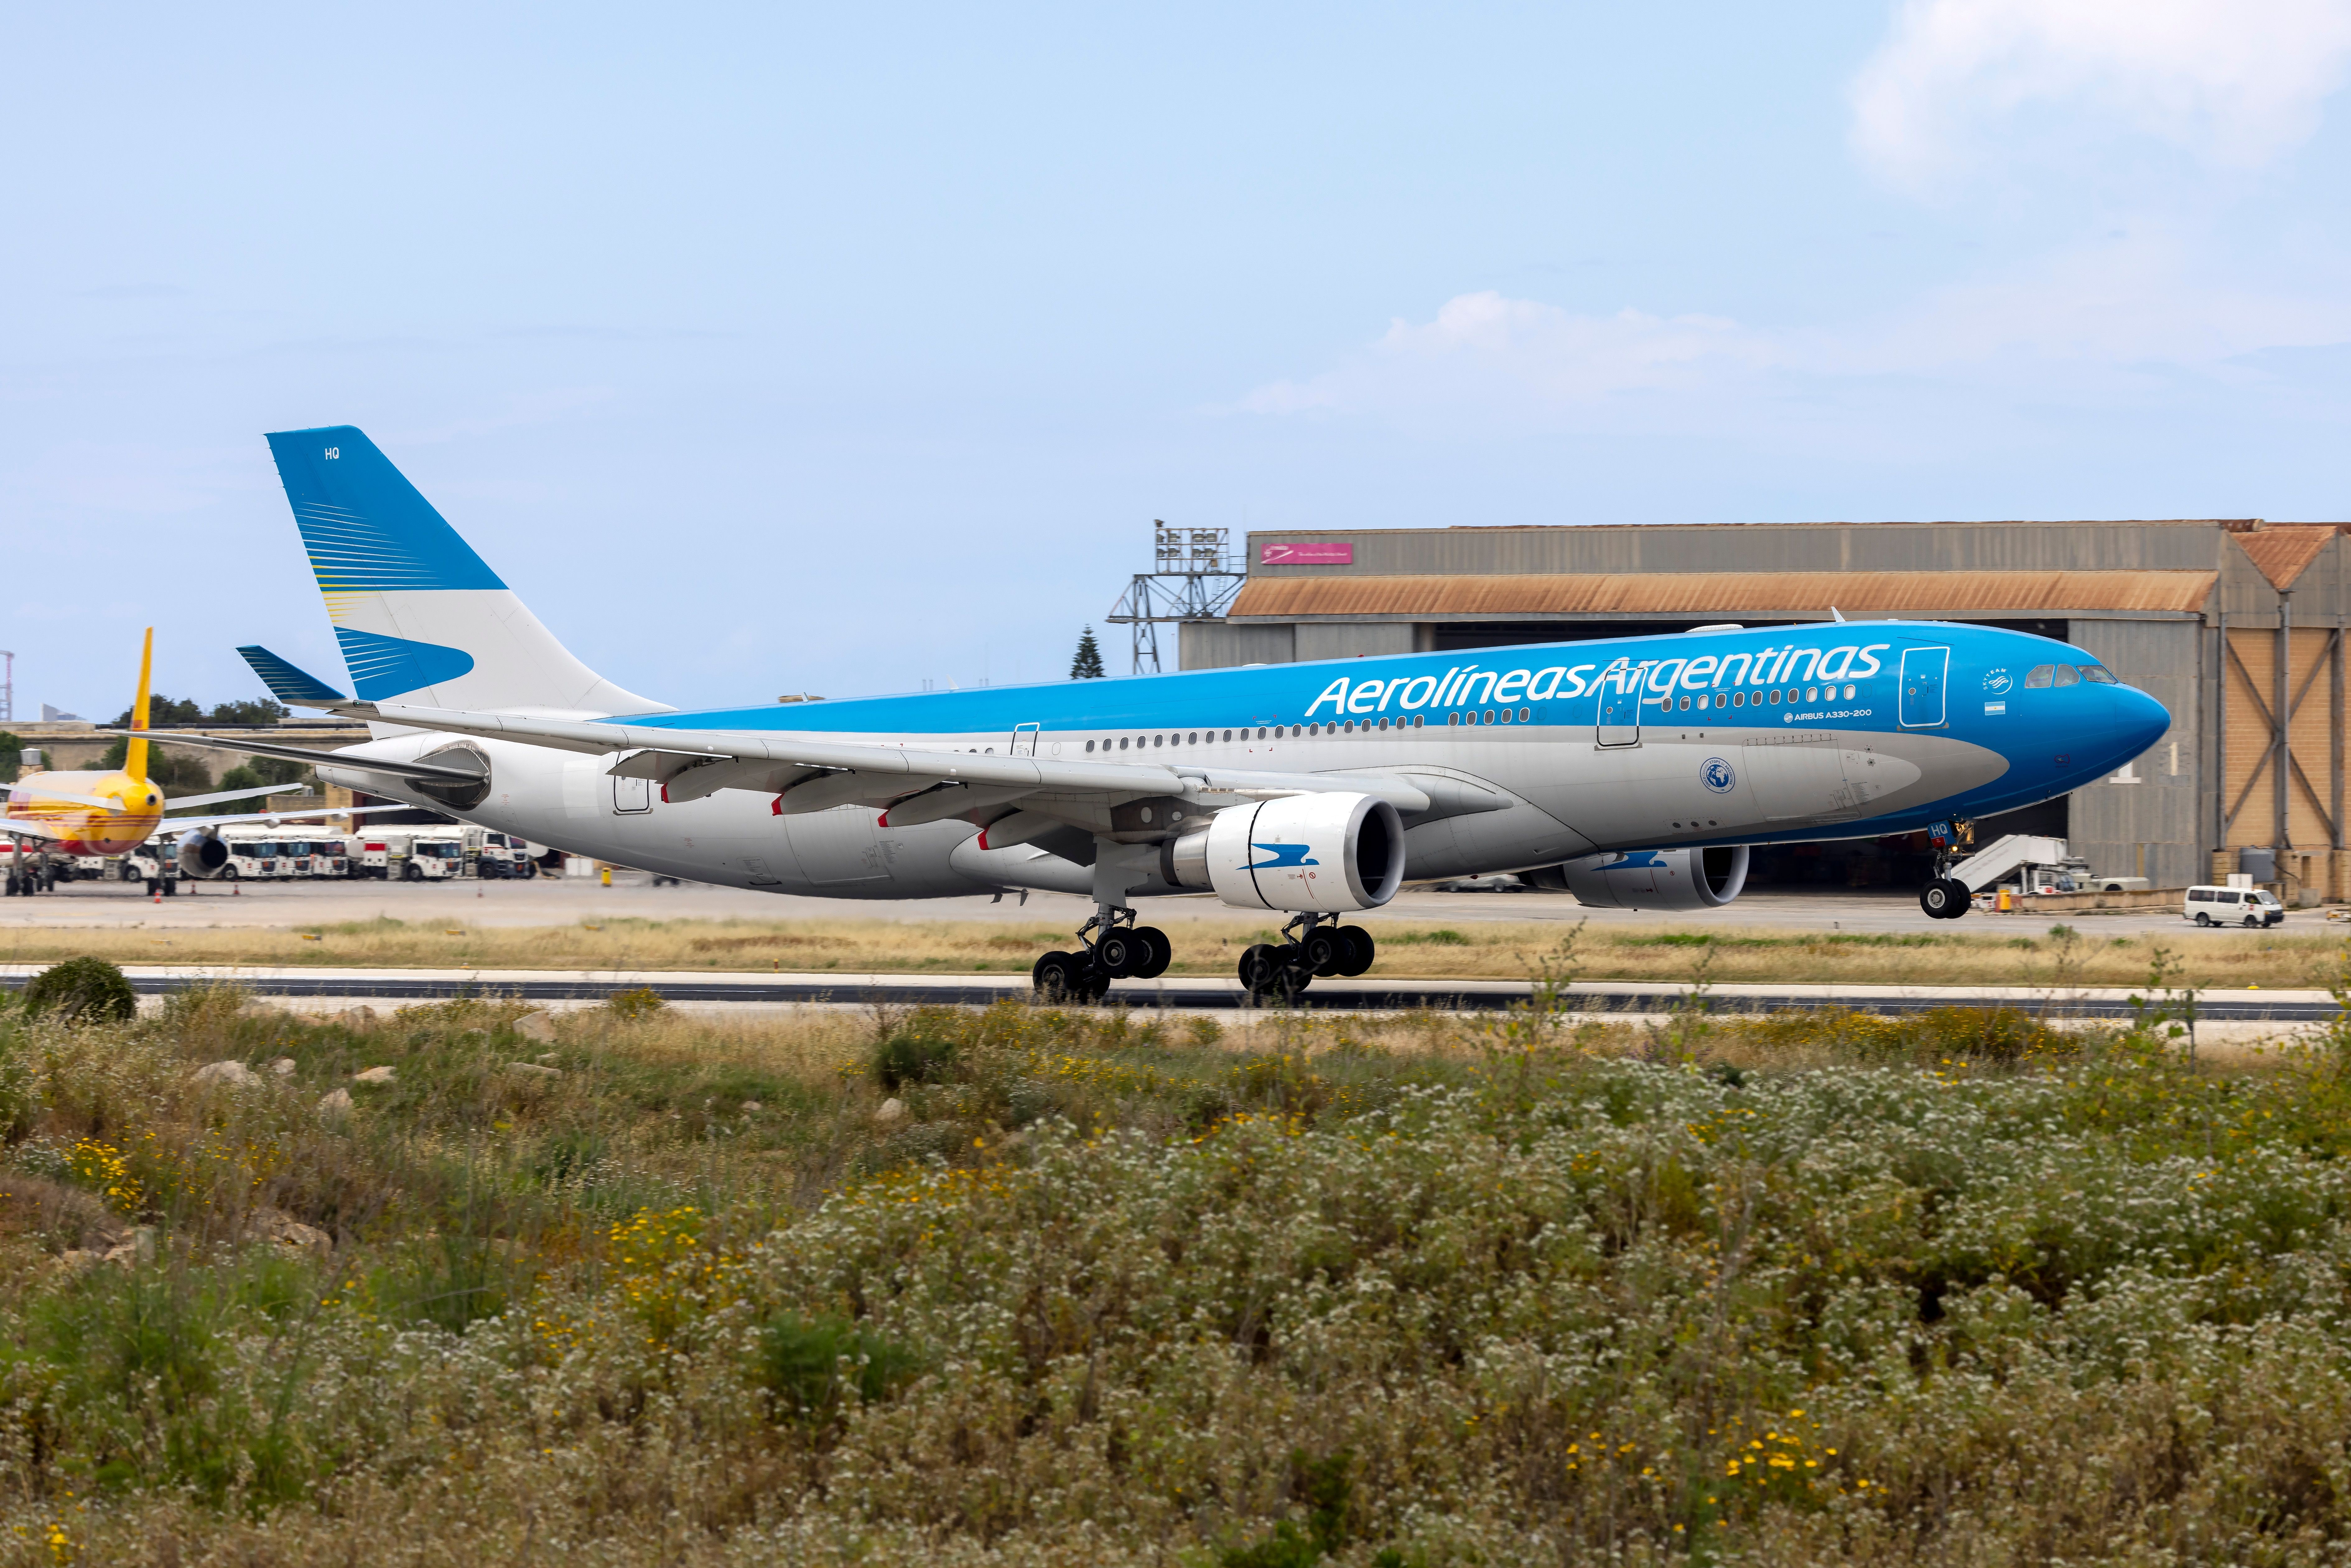 An Aerolineas Argentinas Airbus A330 about to take off